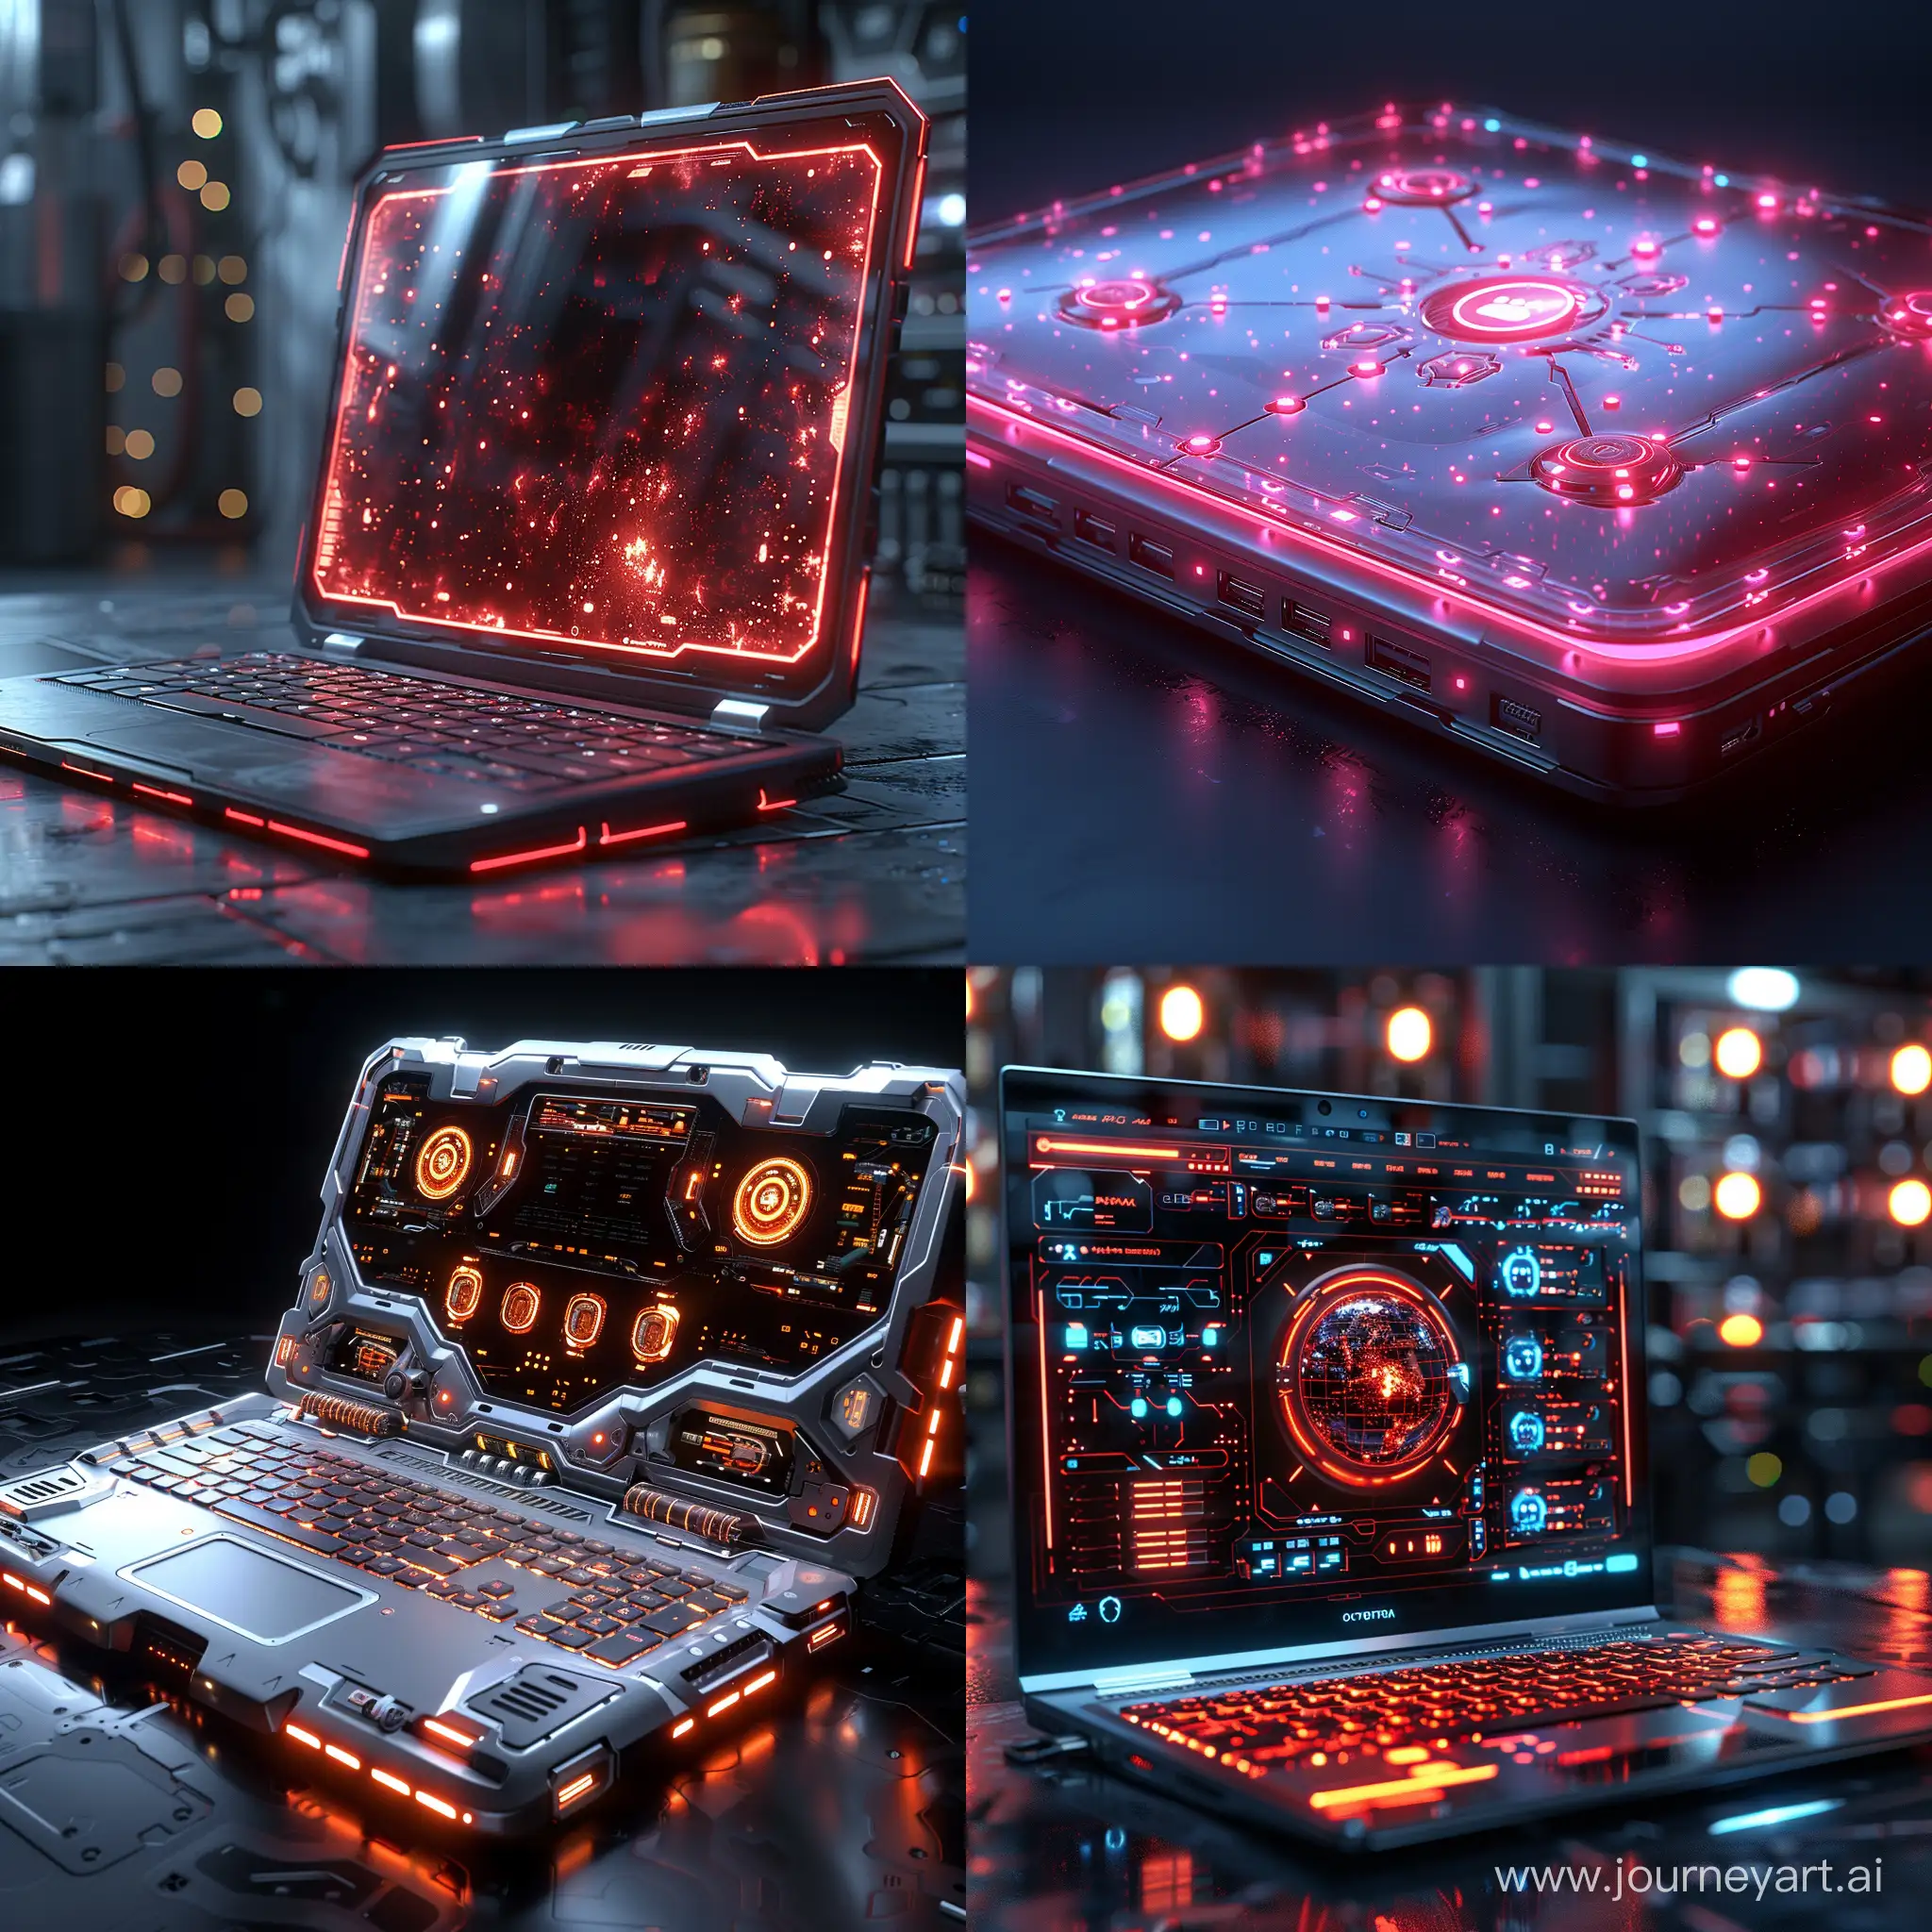 Futuristic-Laptop-with-Octane-Render-CuttingEdge-Technology-in-Stylized-11-Aspect-Ratio